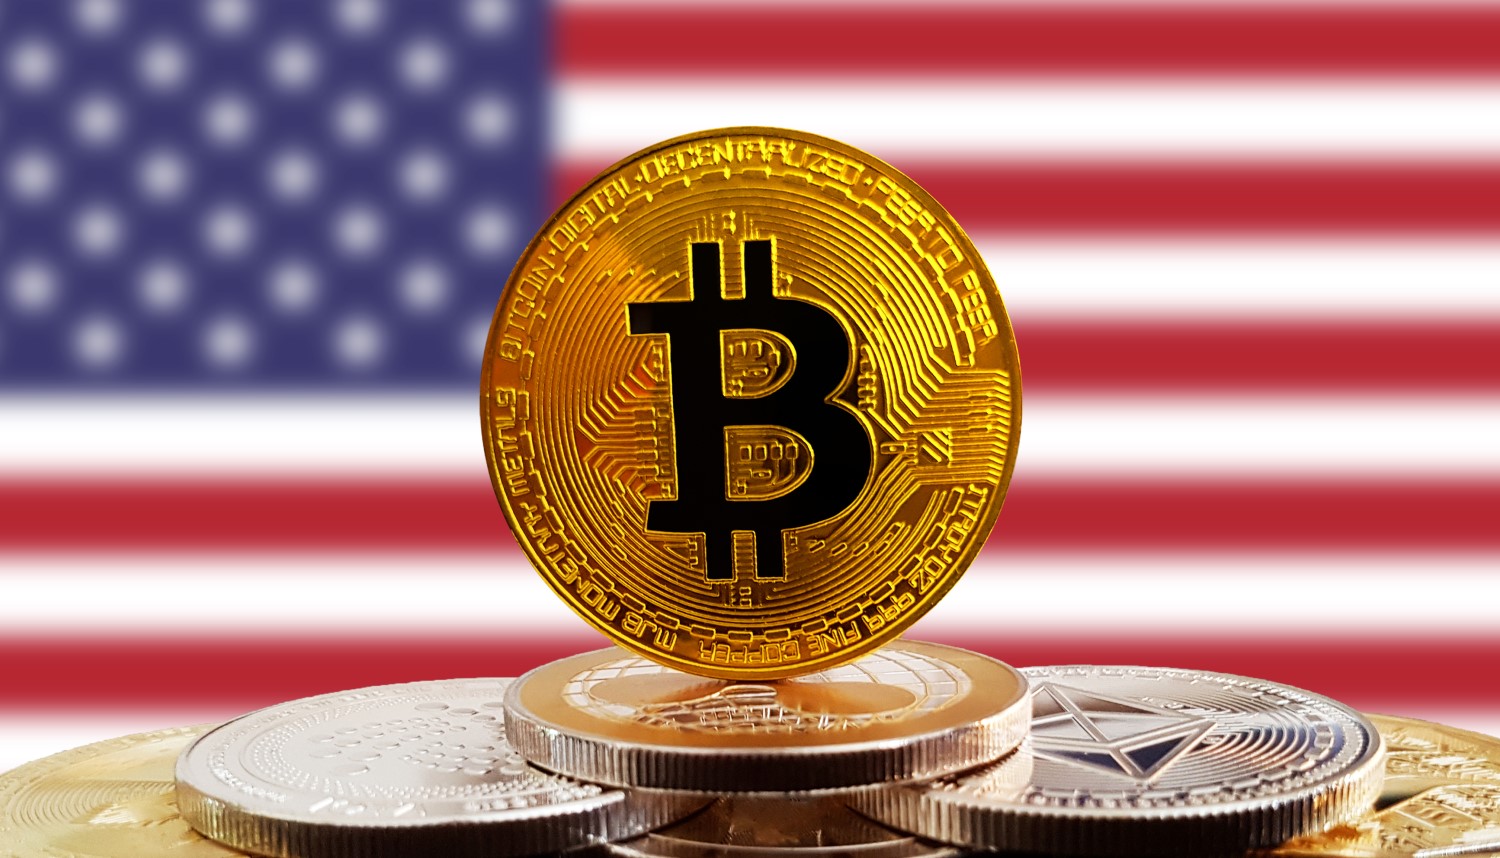 Bitcoin Eyes Independence Day Price Gains For Fifth Year Running